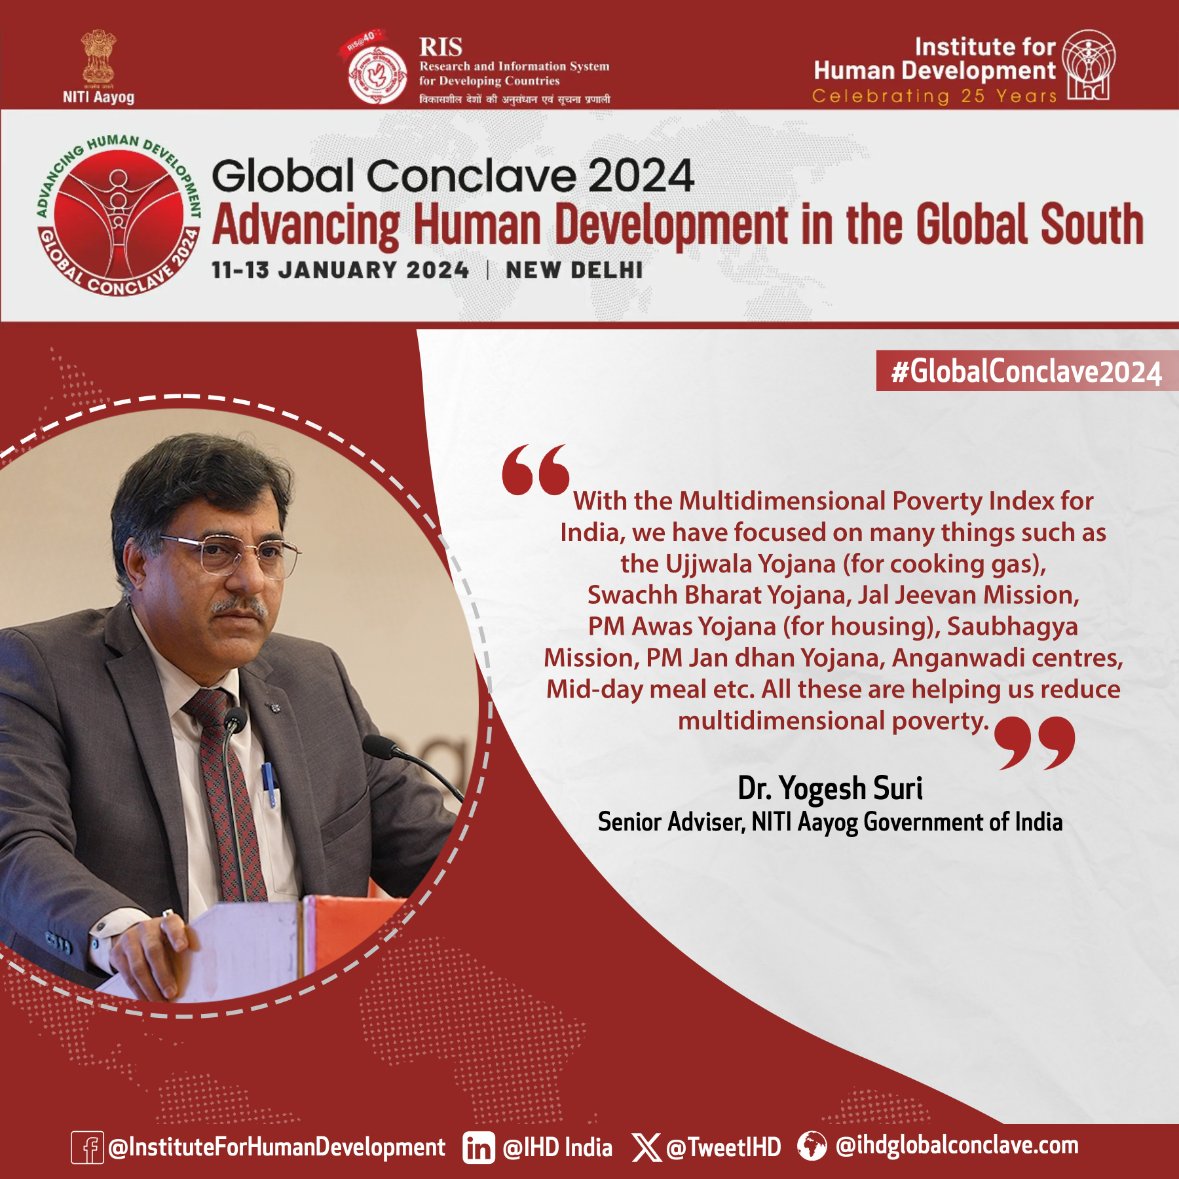 Yogesh Suri briefs us on the benefits of using the Multidimensional Poverty Index towards reducing poverty in India. Organized by:- @UNDP @NITIAayog @TweetIHD #GlobalConclave2024 #IHD25Years #IHDIndia #GC2024 #NITIAayog